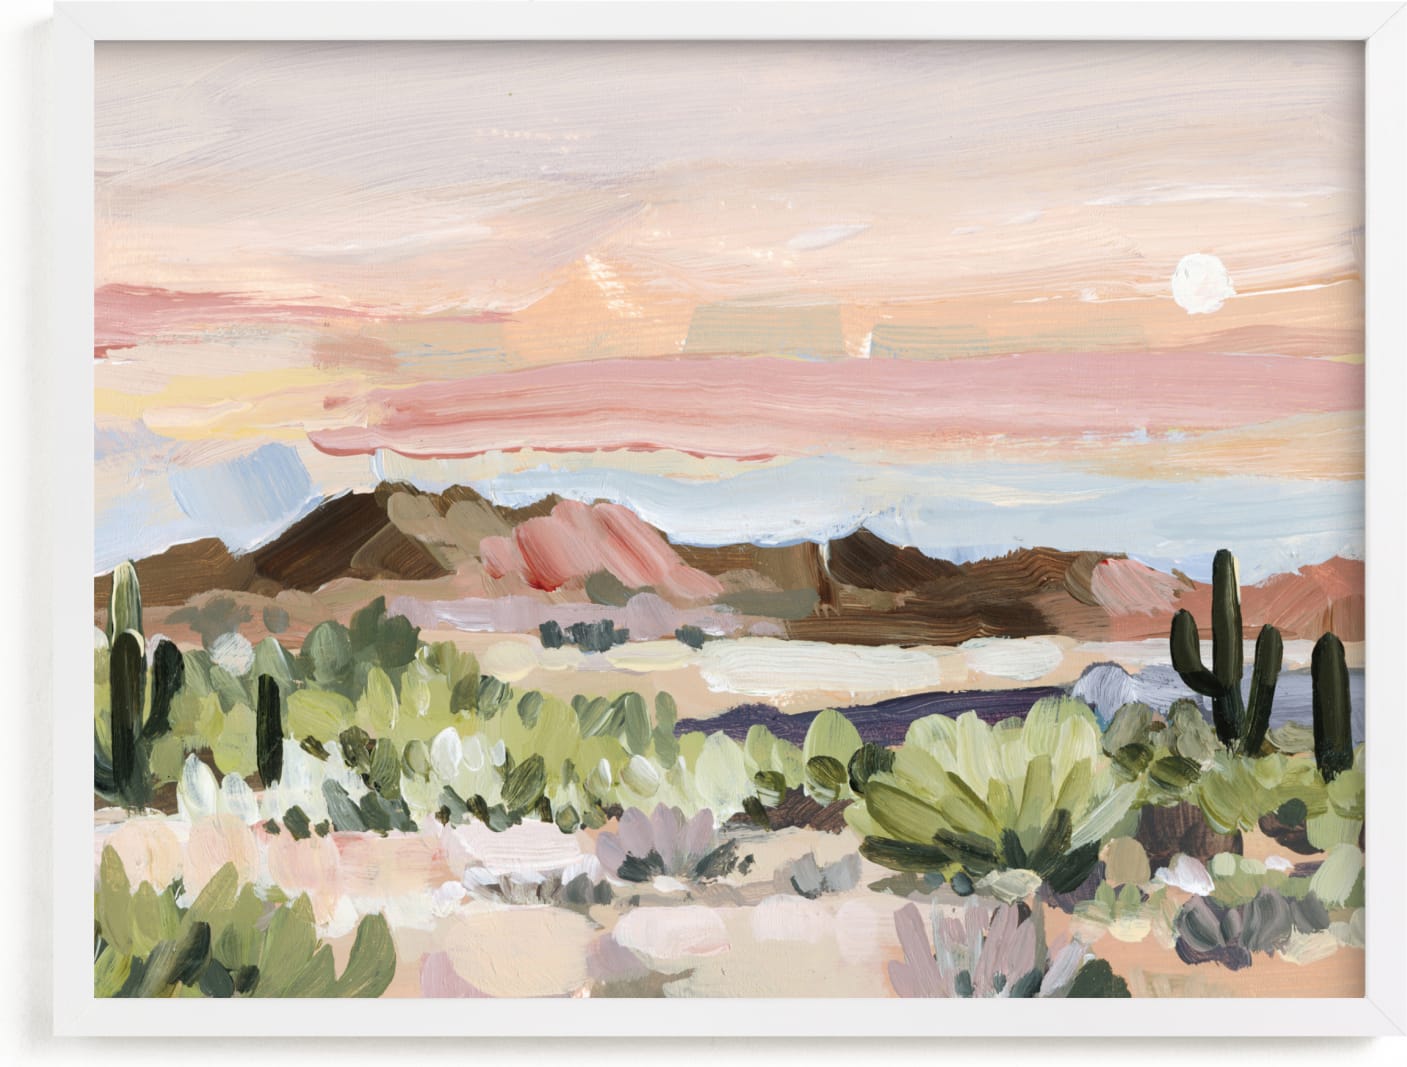 This is a pink art by Shina Choi called Arizona Desert Sunset.